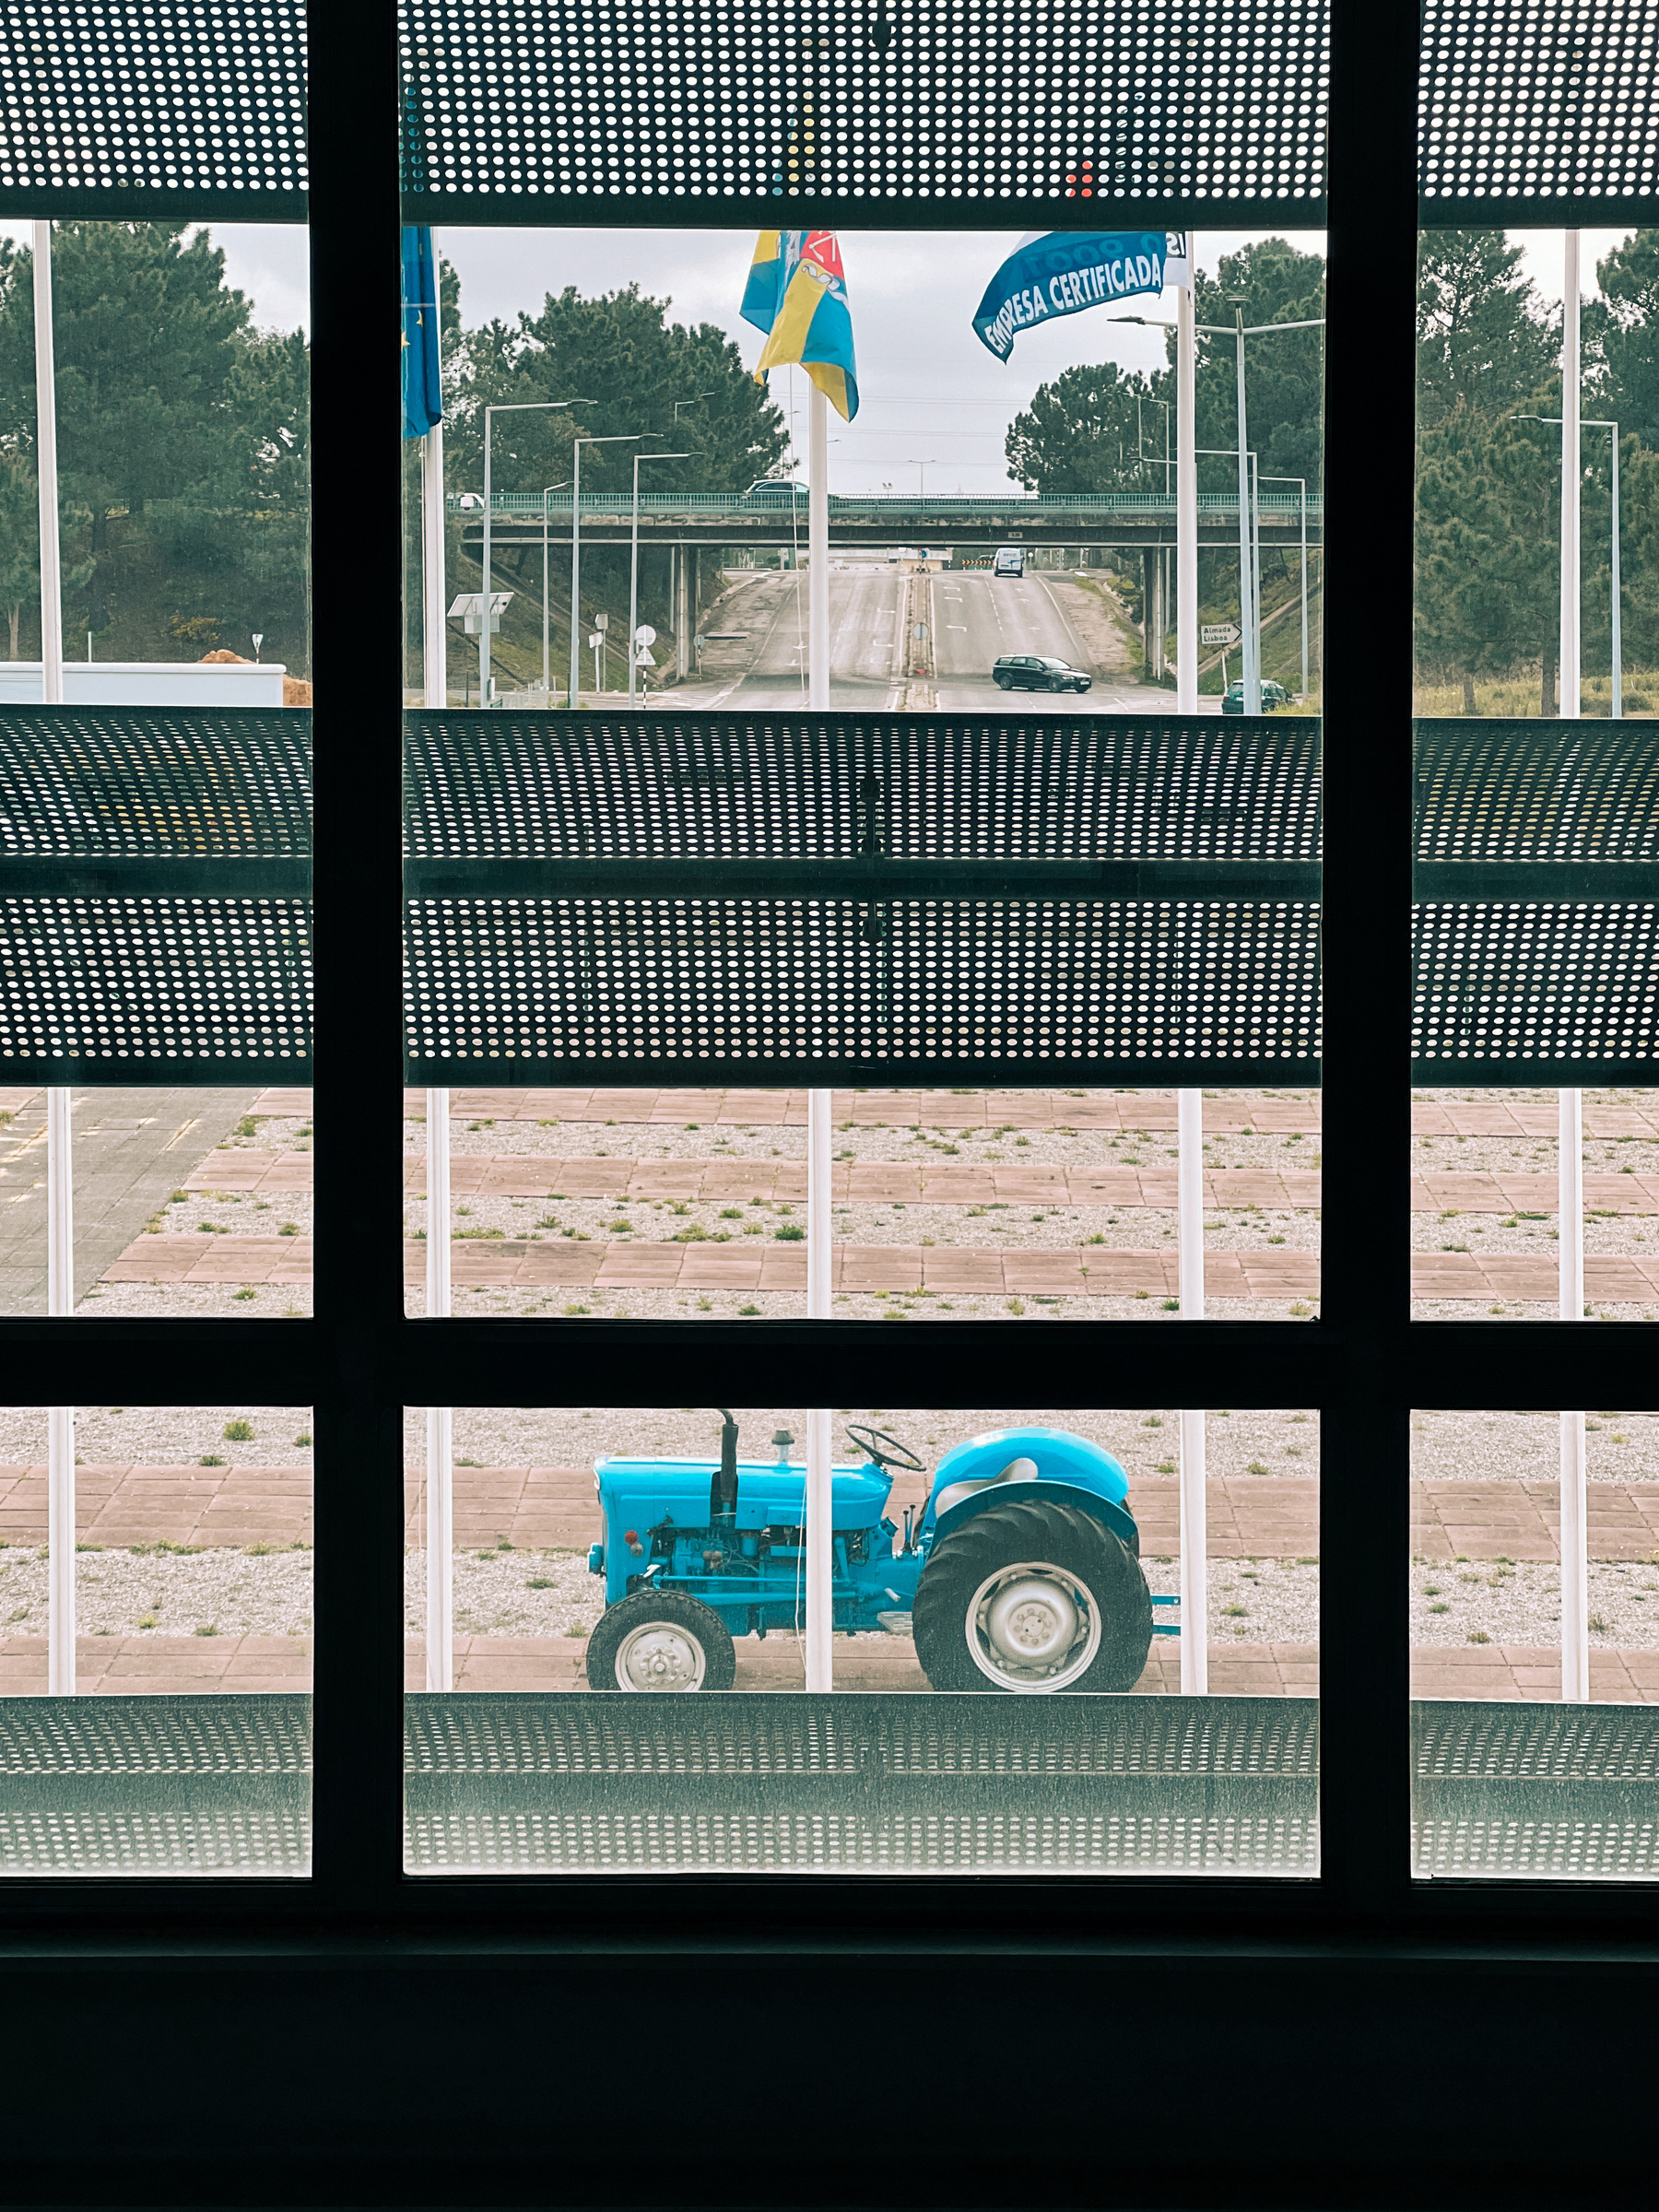 A view through a window with patterned shading revealing a blue tractor parked outside, with a highway in the background flanked by greenery and two flags fluttering in the wind.